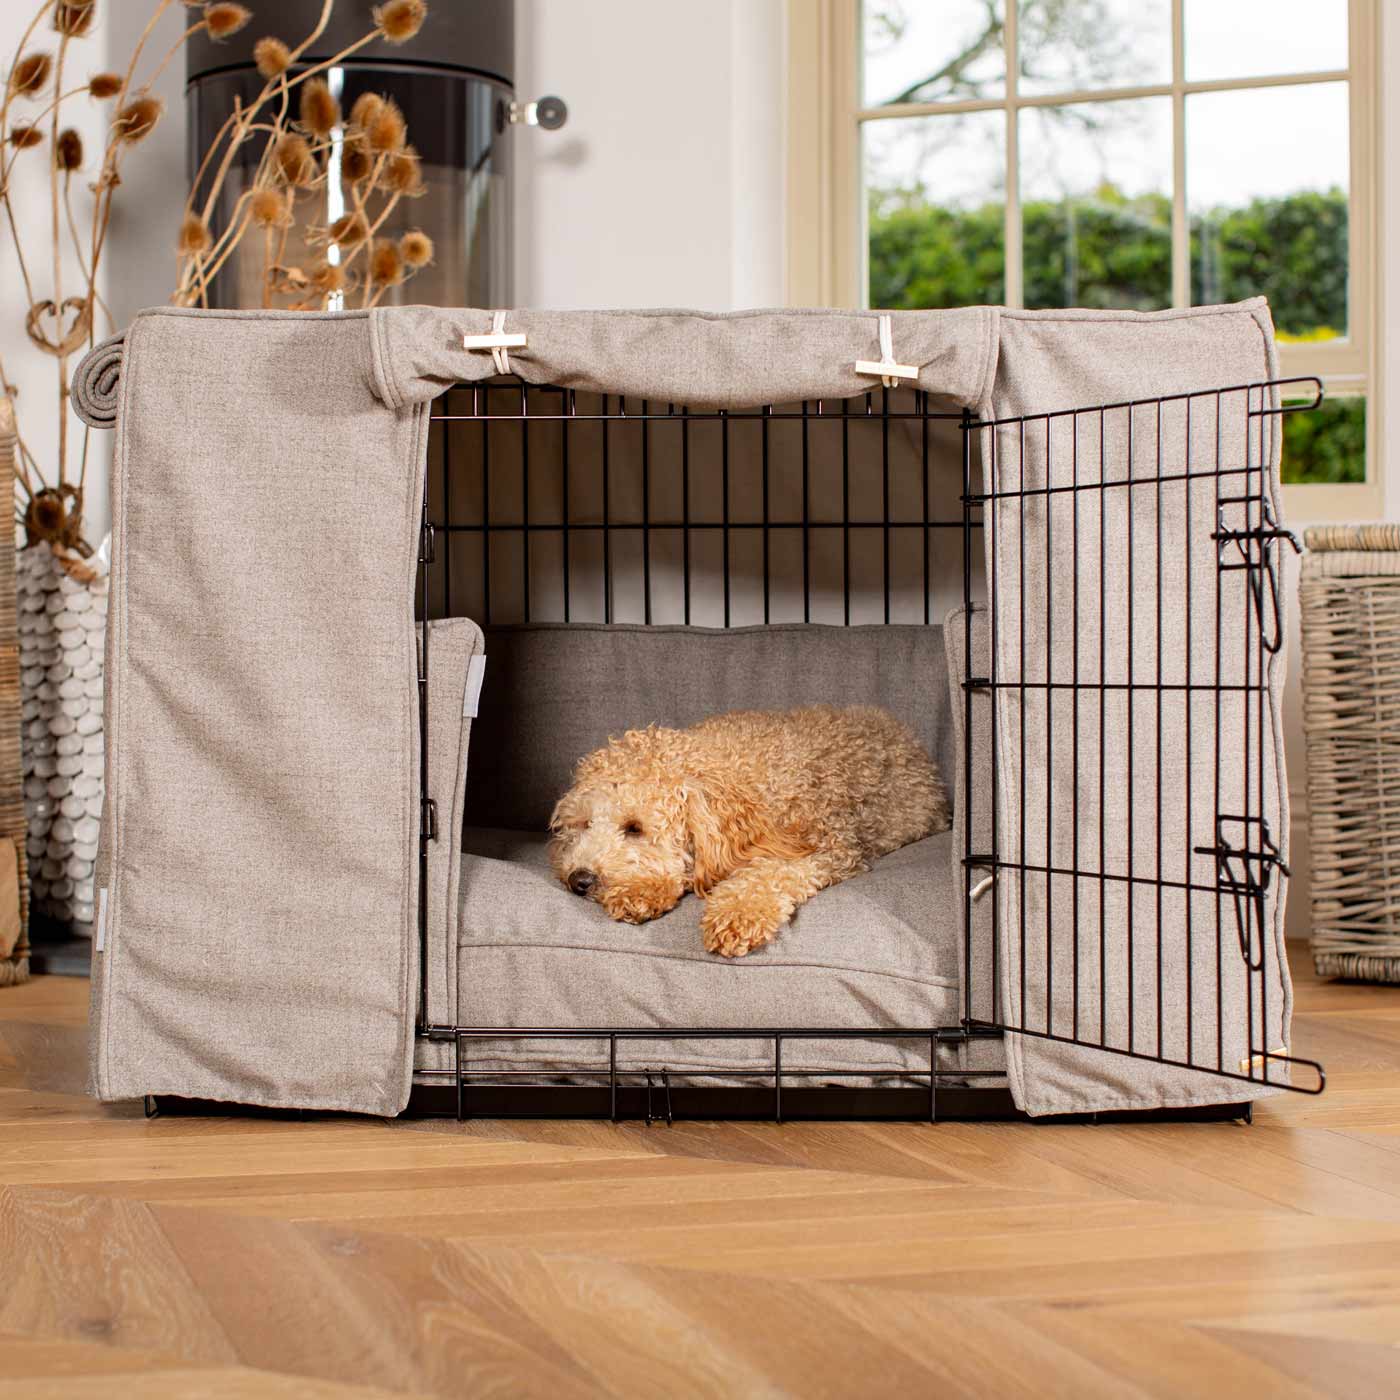 Dog Crate Set In Inchmurrin Ground by Lords & Labradors